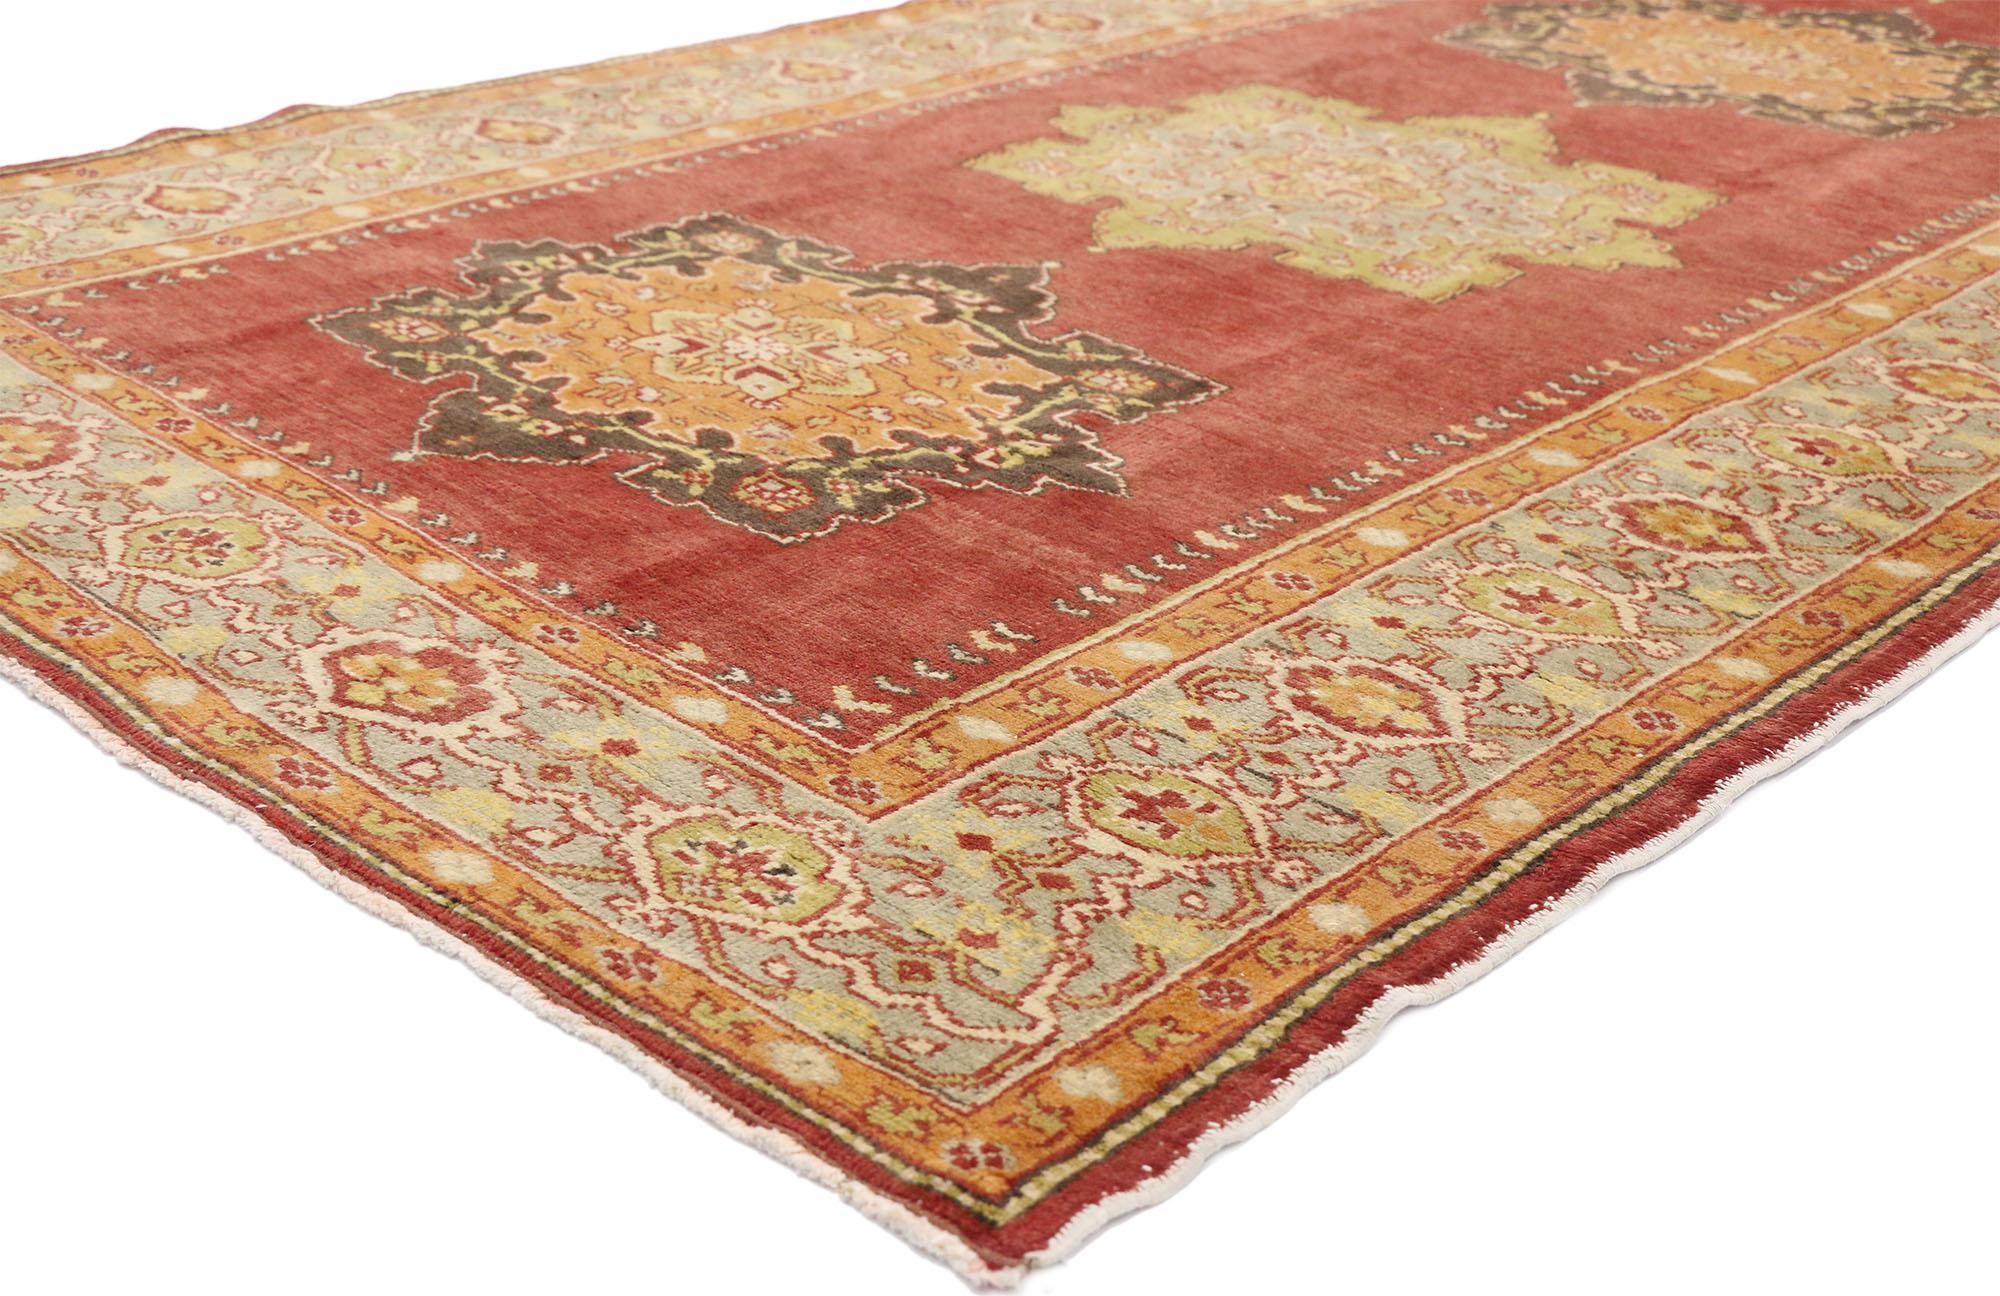 52502 Vintage Turkish Oushak Wide Hallway Runner with Spanish Revival Style 04'11 x 13'01. This hand-knotted wool vintage Turkish Oushak runner features five floral lobed medallions in alternating colors spread across an abrashed red field. Each